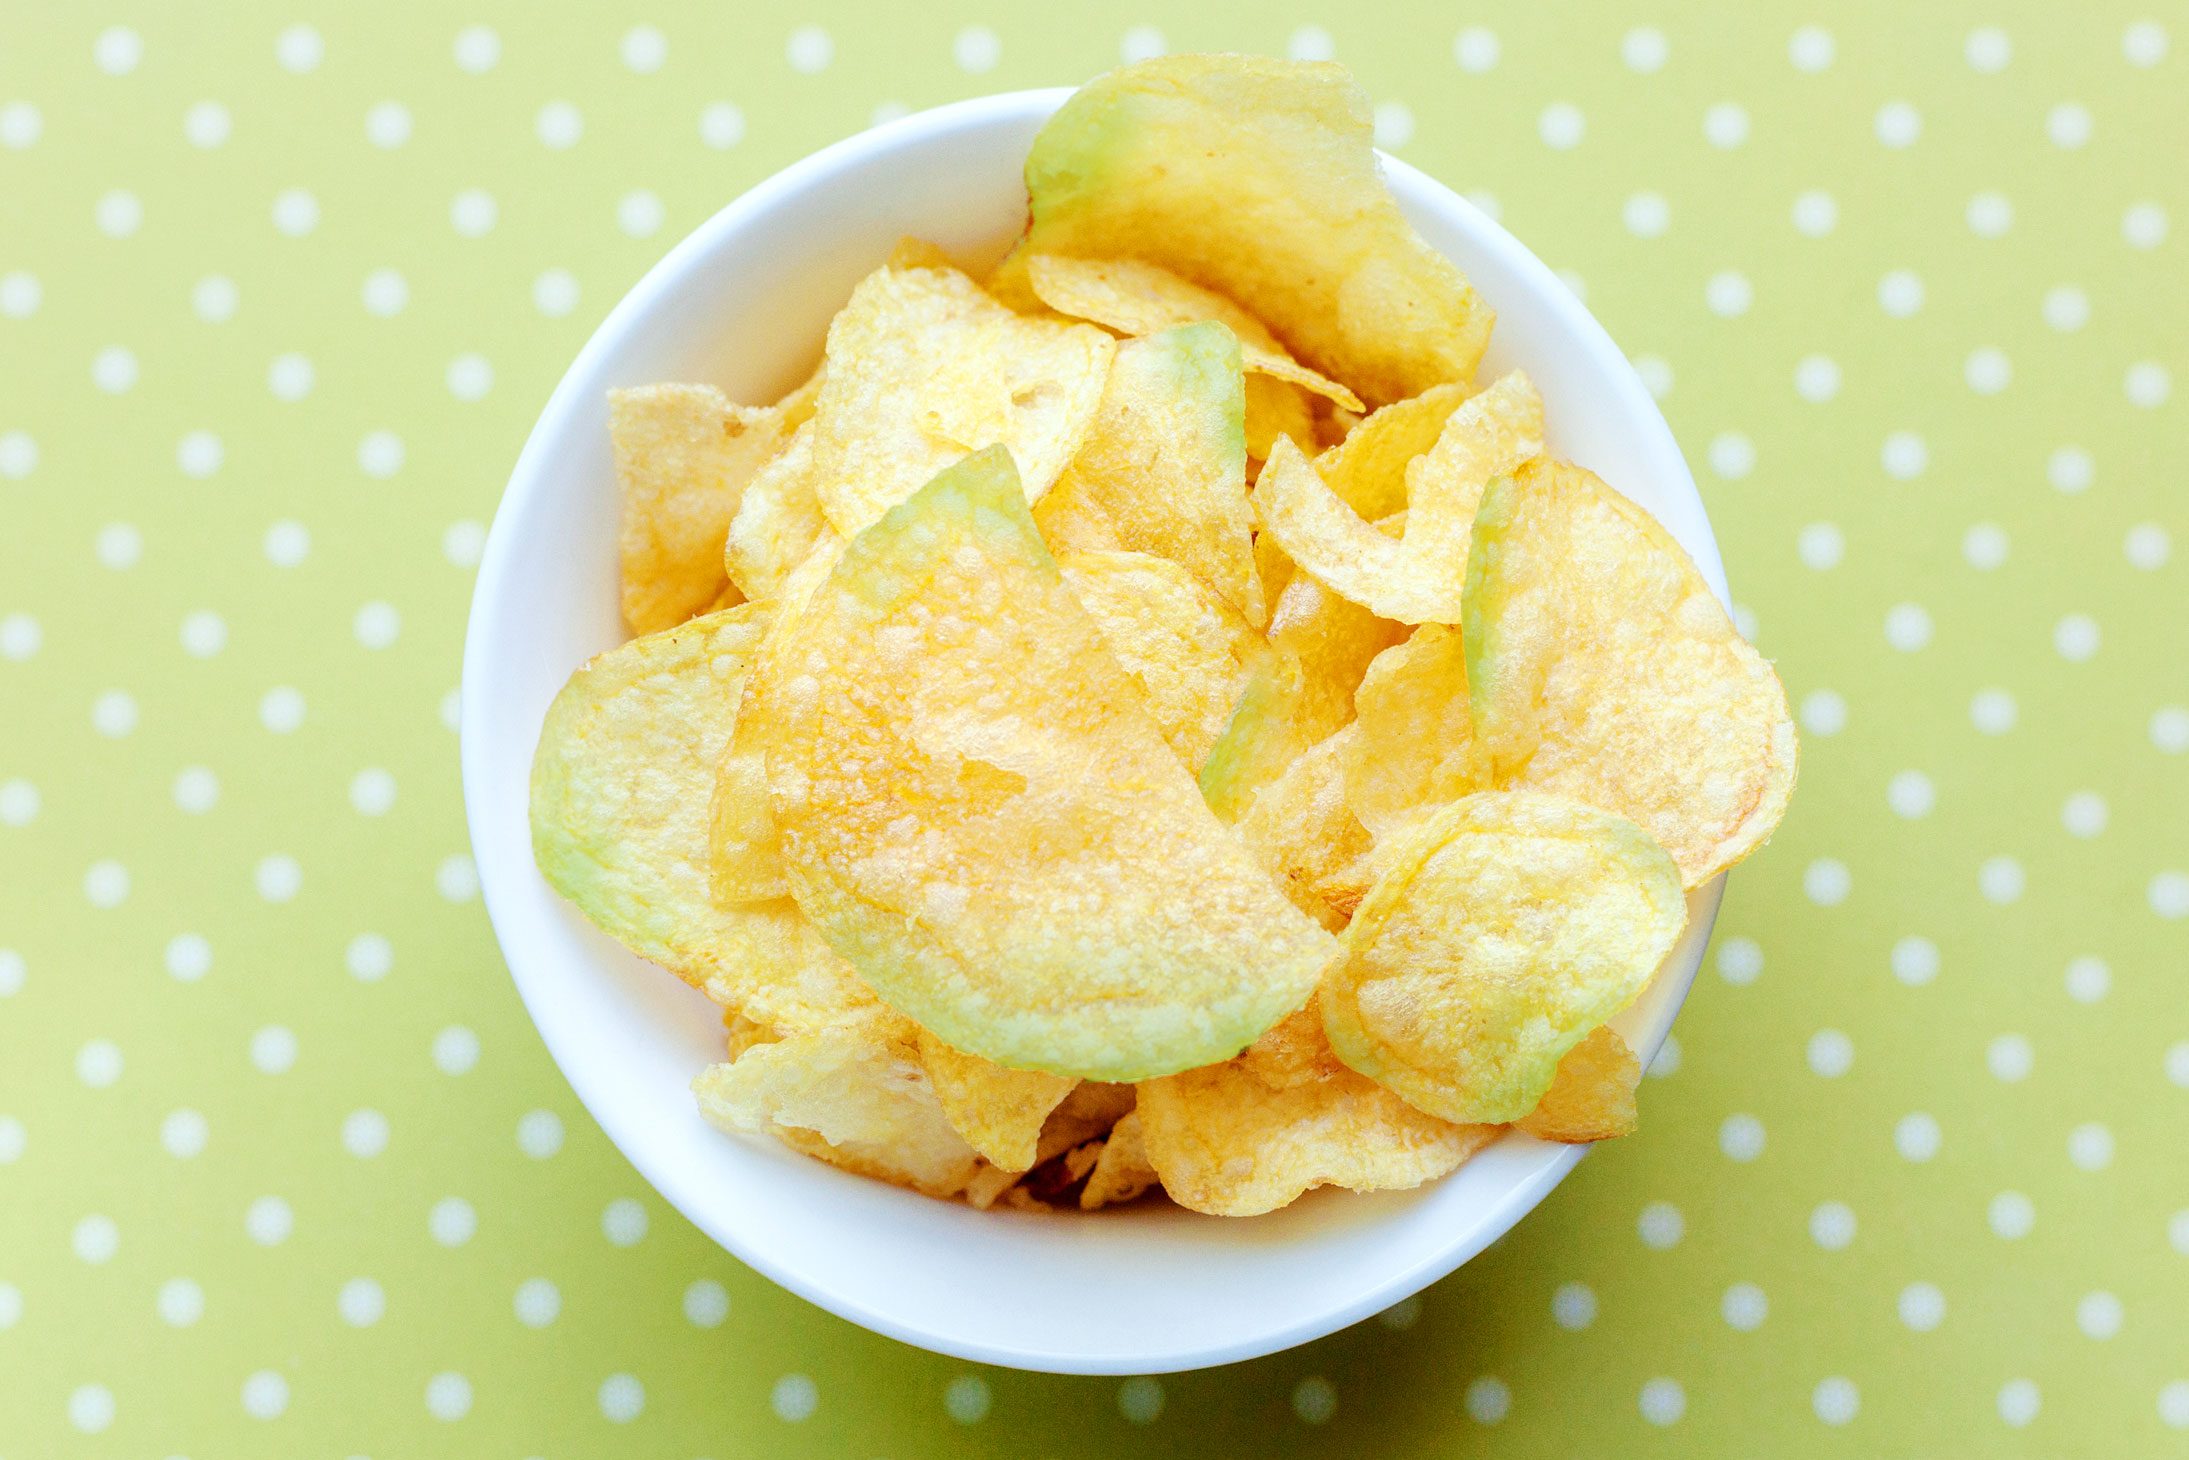 Are Potato Chips Bad For You? - Here Is Your Answer.